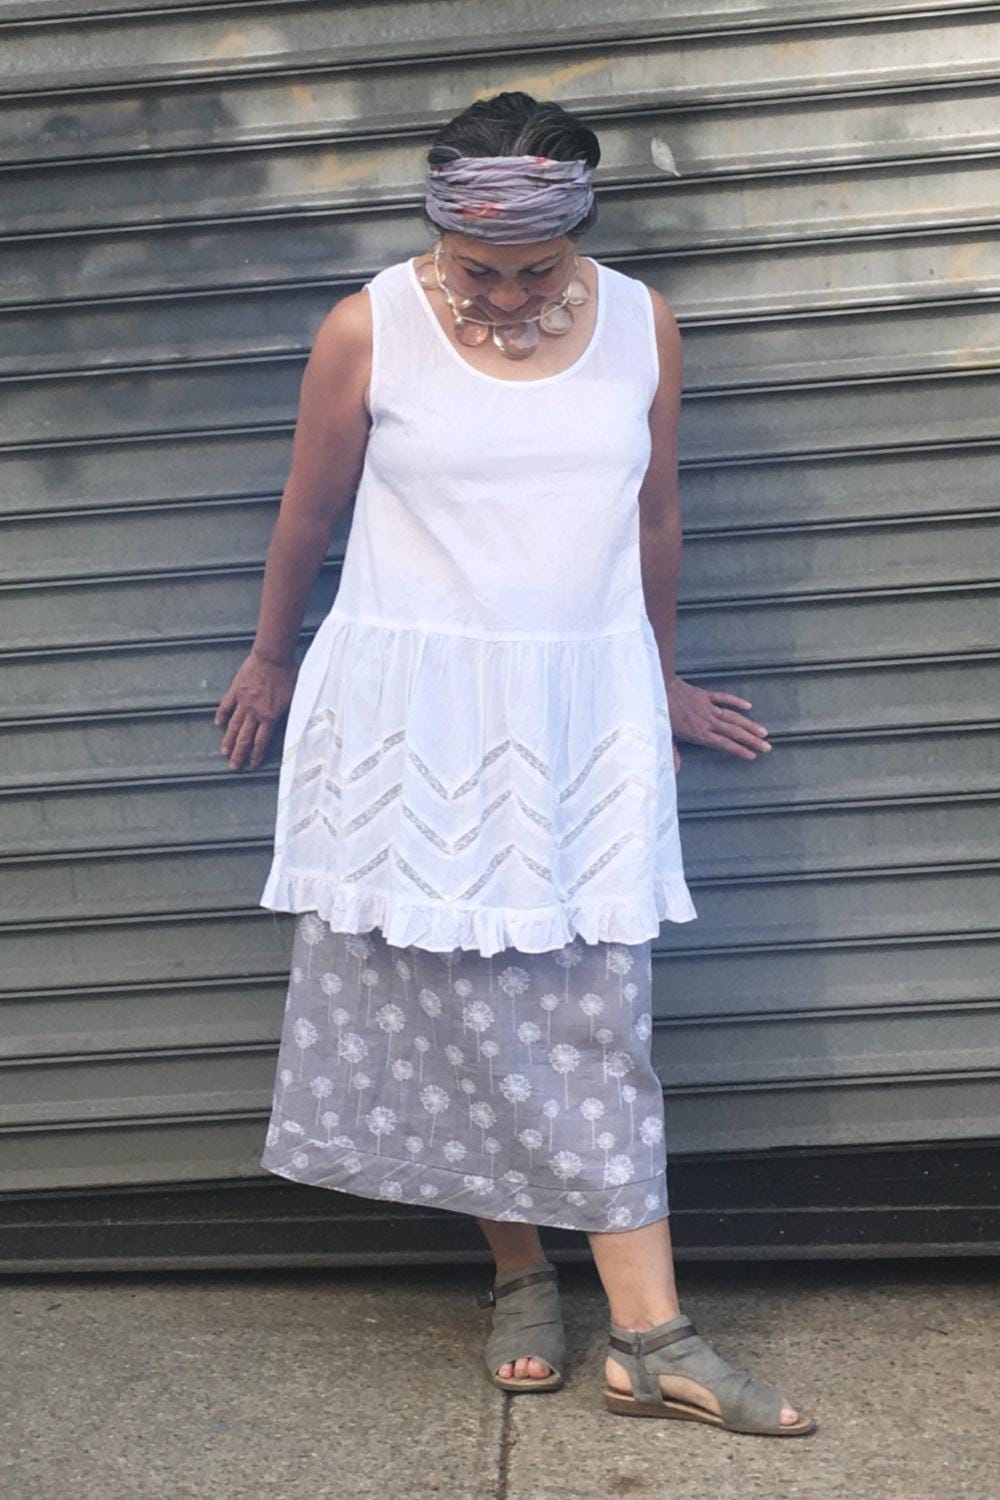 Sweet grey and white cotton skirt with a dandilion print worn on a woman aslo whereing a cotton sleeveless tunic with cutouts.